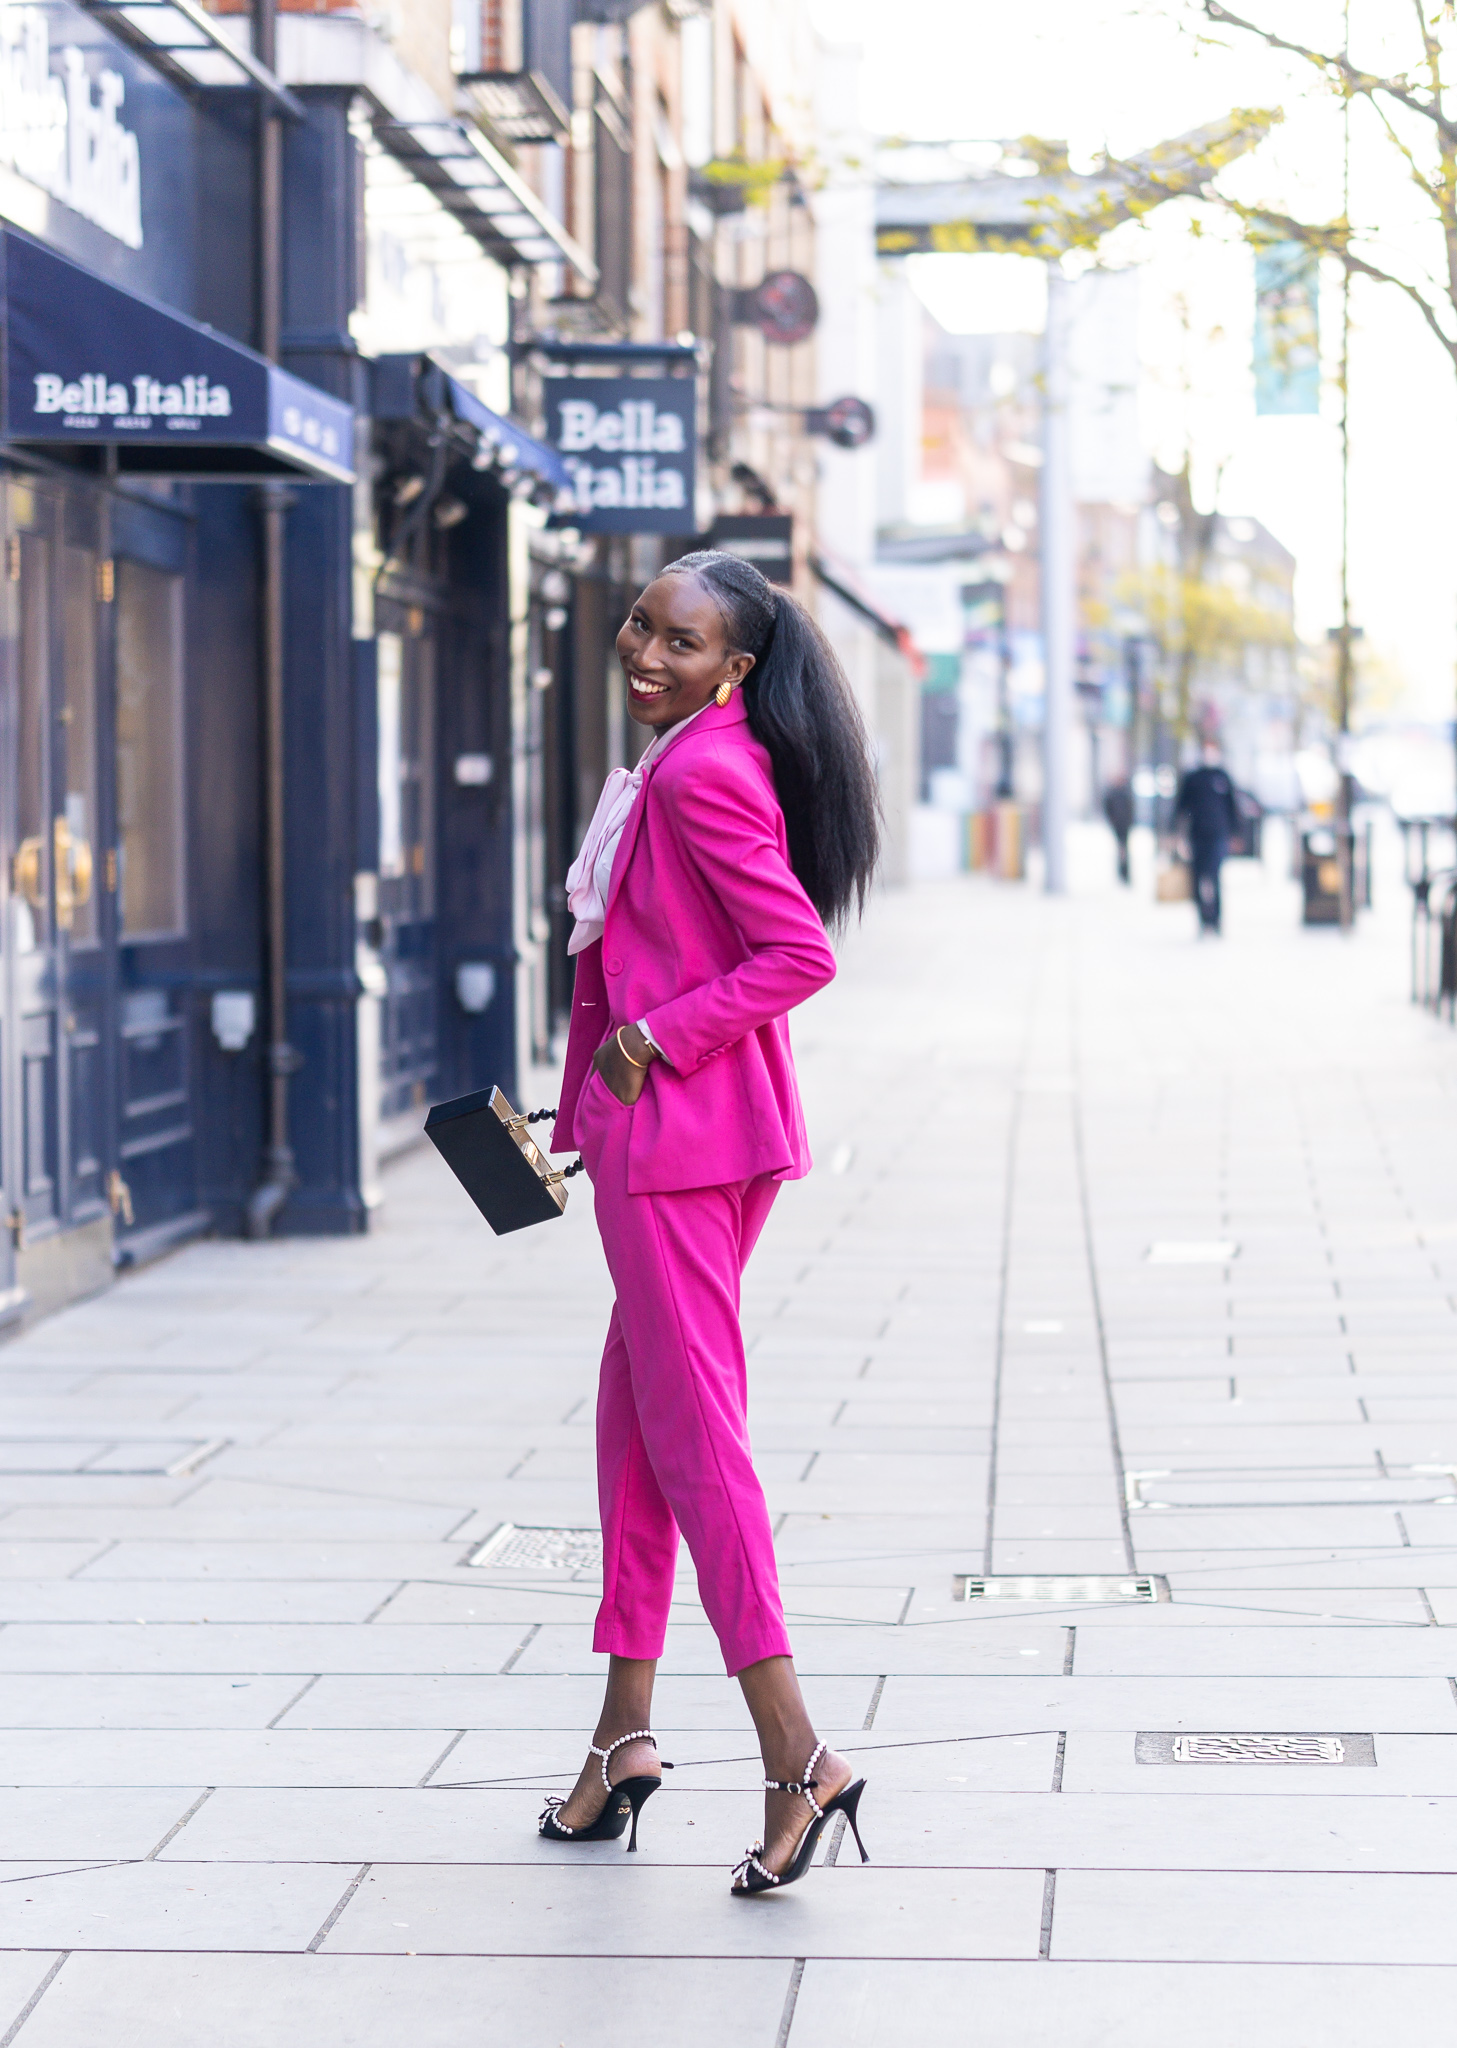 https://thatcorporatechic.com/wp-content/uploads/2021/05/Pink-suit-what-to-wear-to-work-this-springsummer-thatcorporatechic-workwear-professional-outfit-office-outfit.jpg